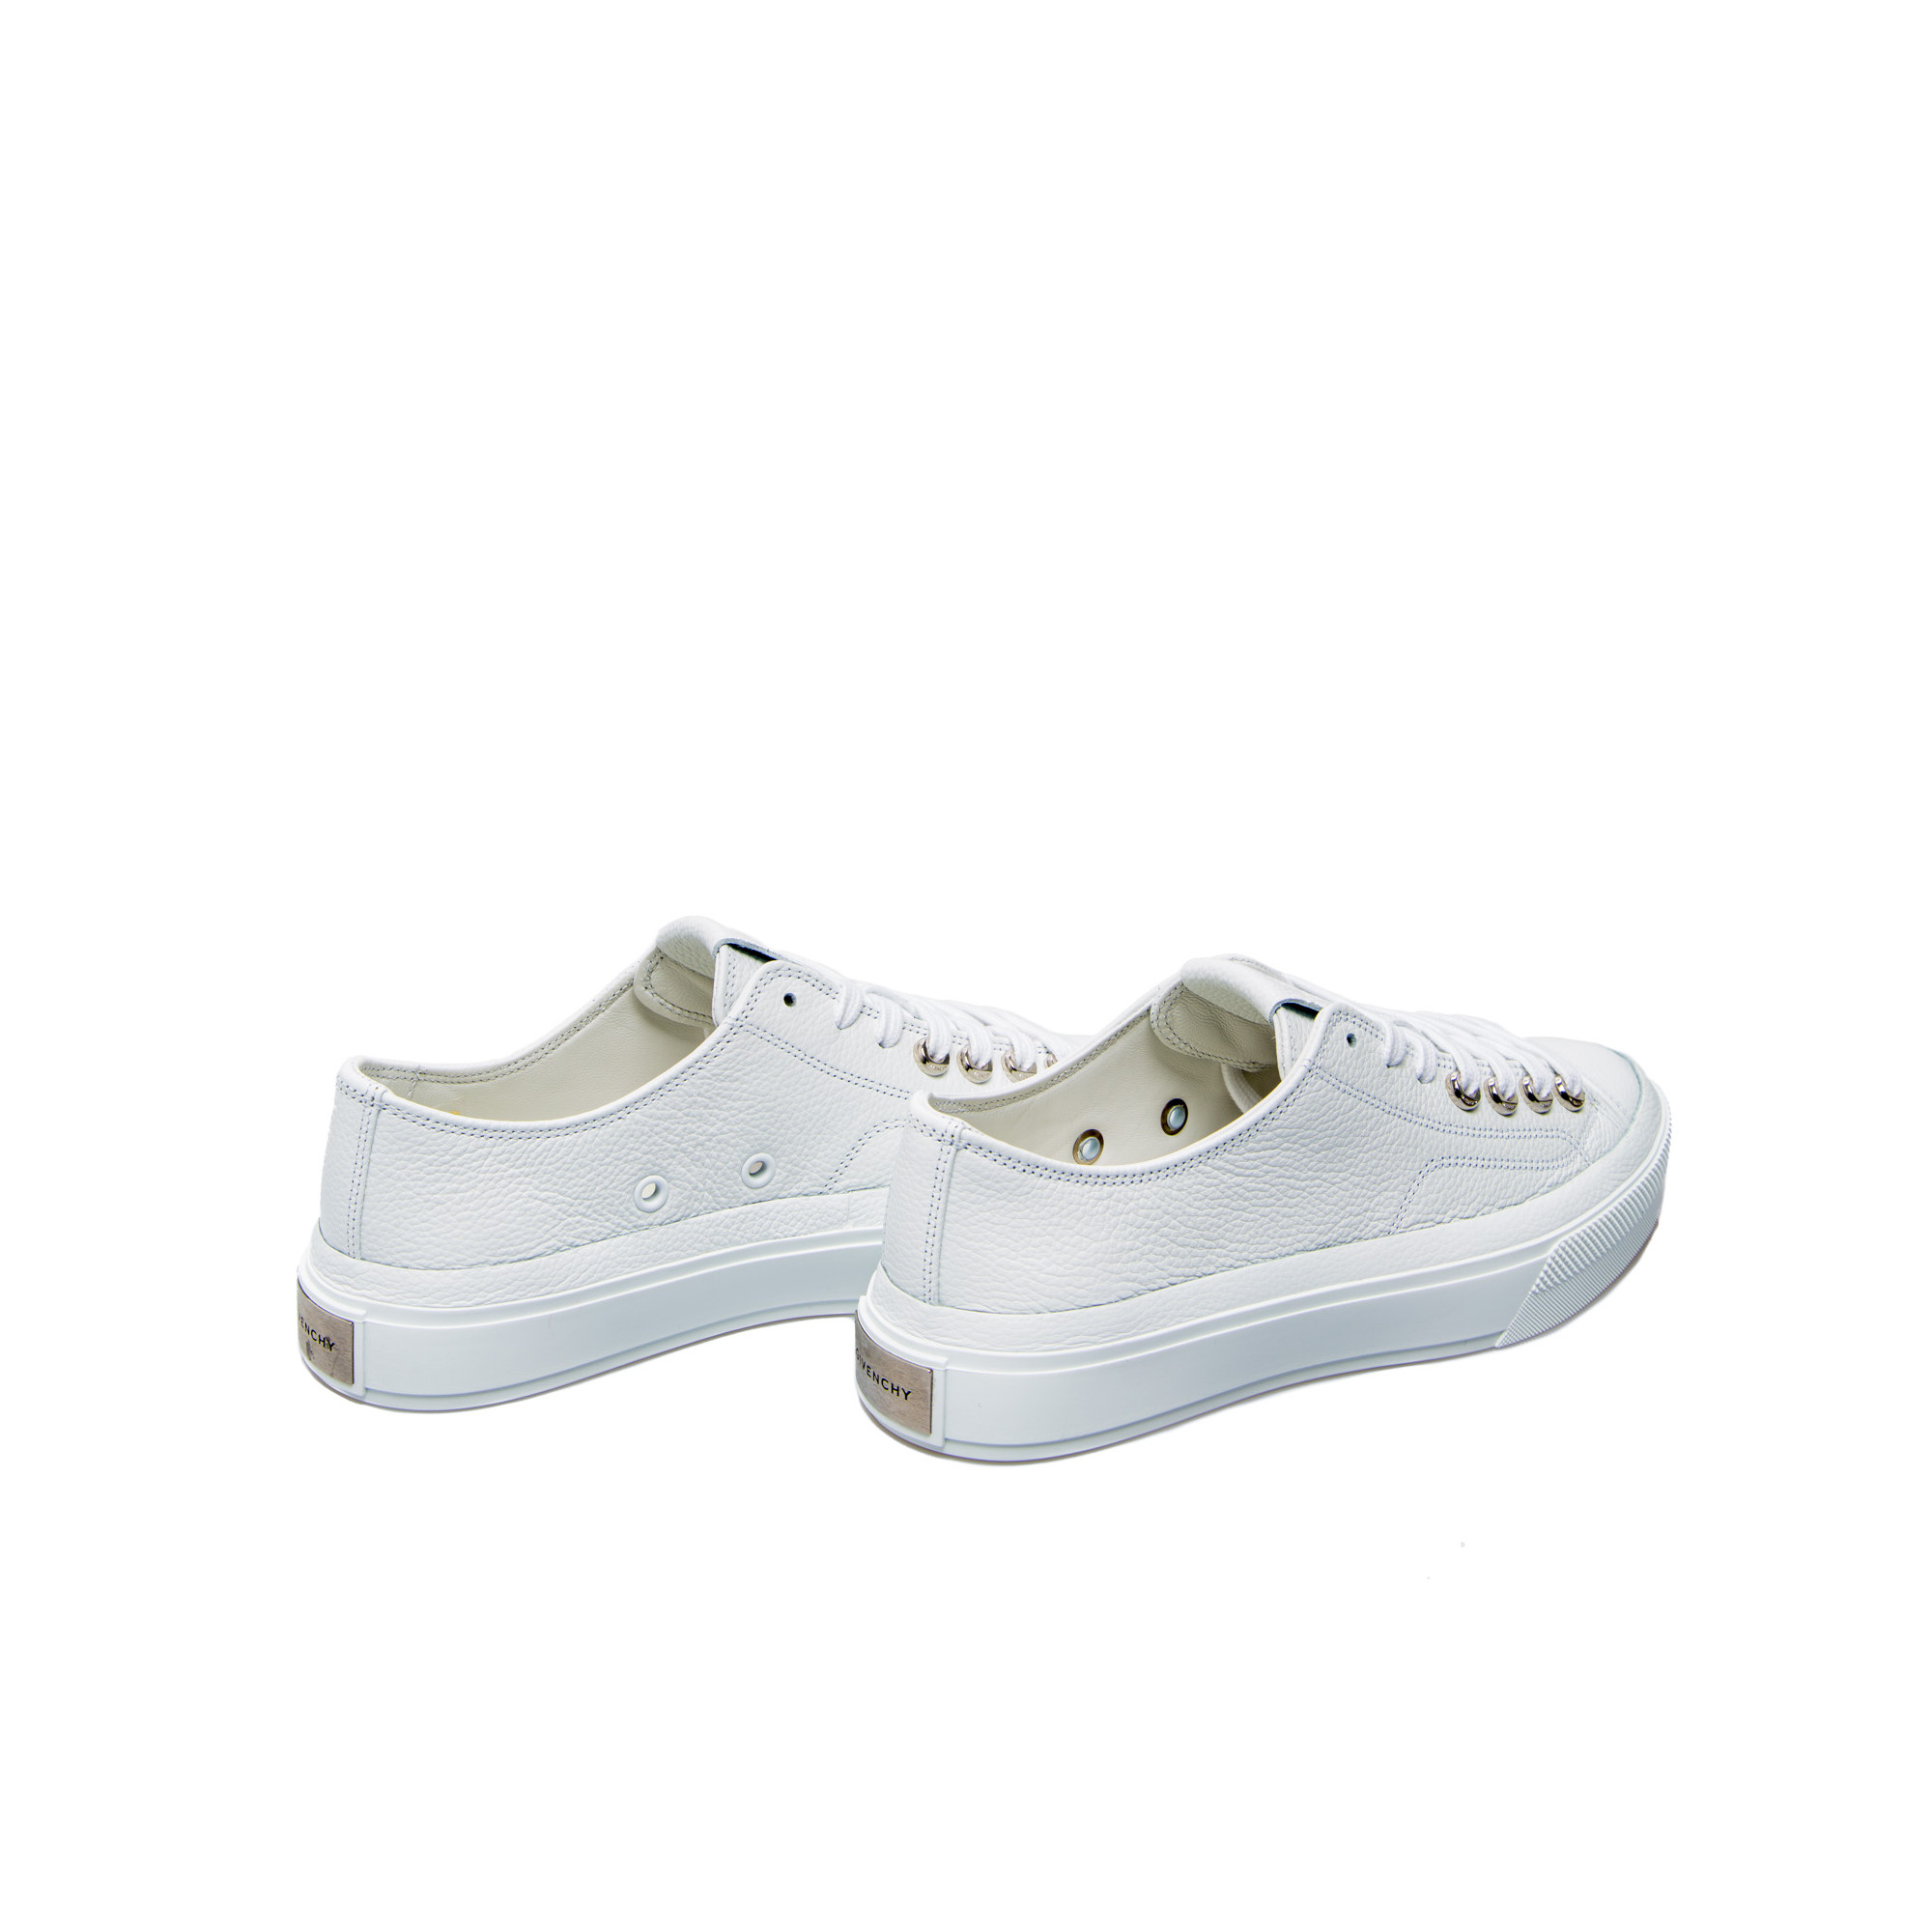 Givenchy City Low Sneakers White | Derodeloper.com